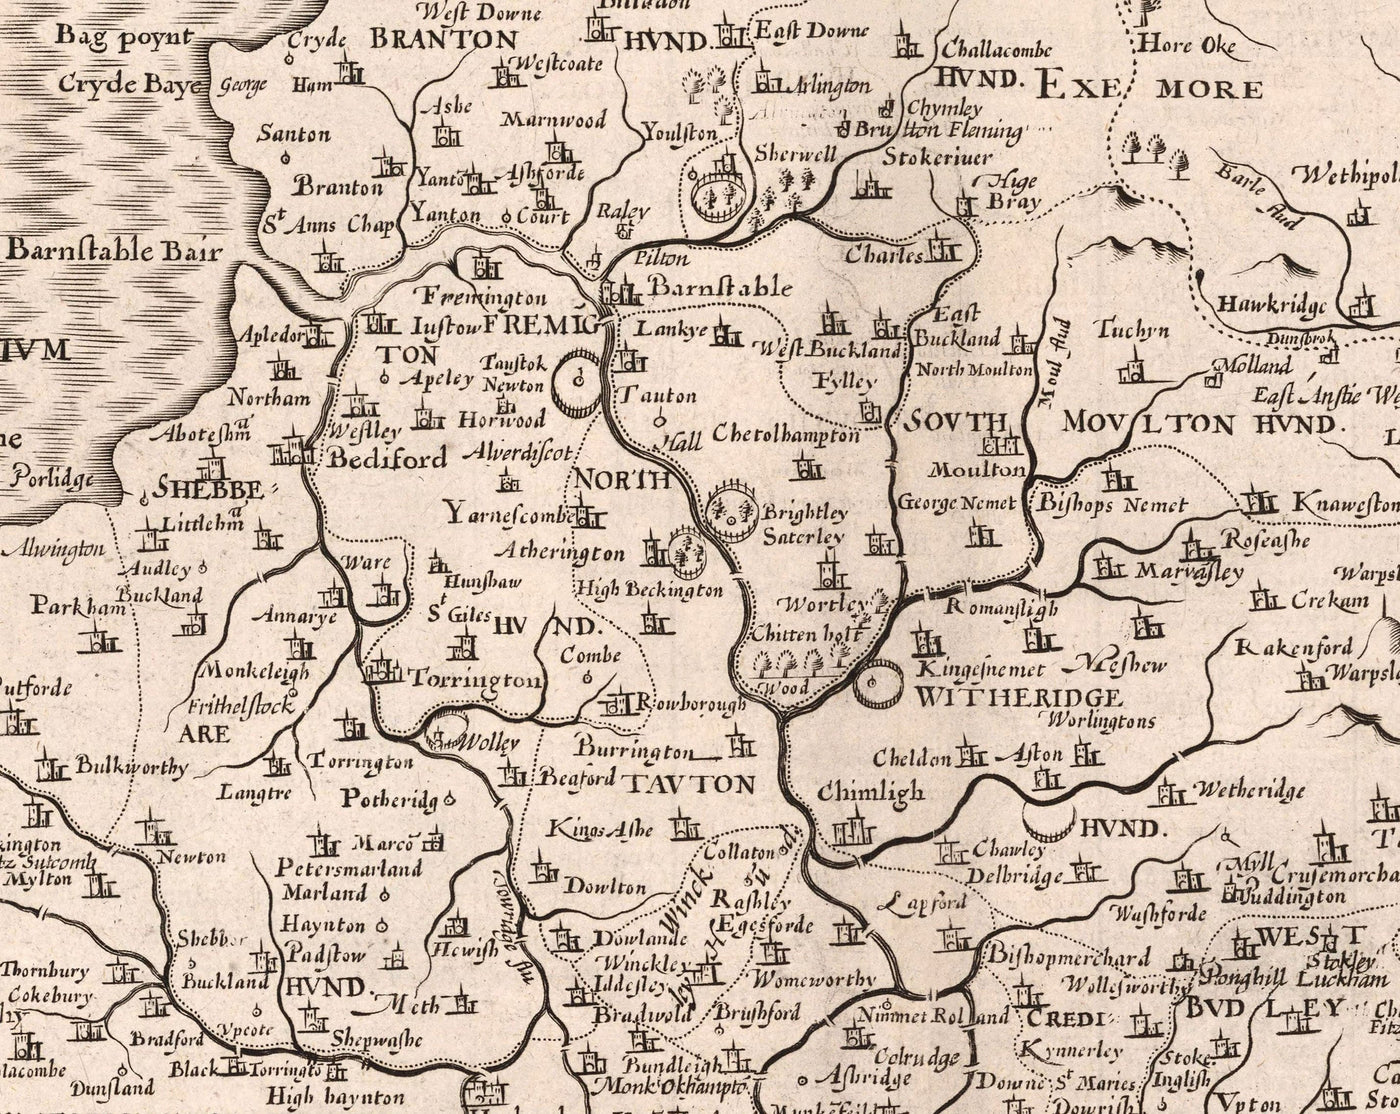 Old Map of Devon, 1611 by John Speed - Plymouth, Exeter, Torquay, Paignton, Exmouth, Barnstaple